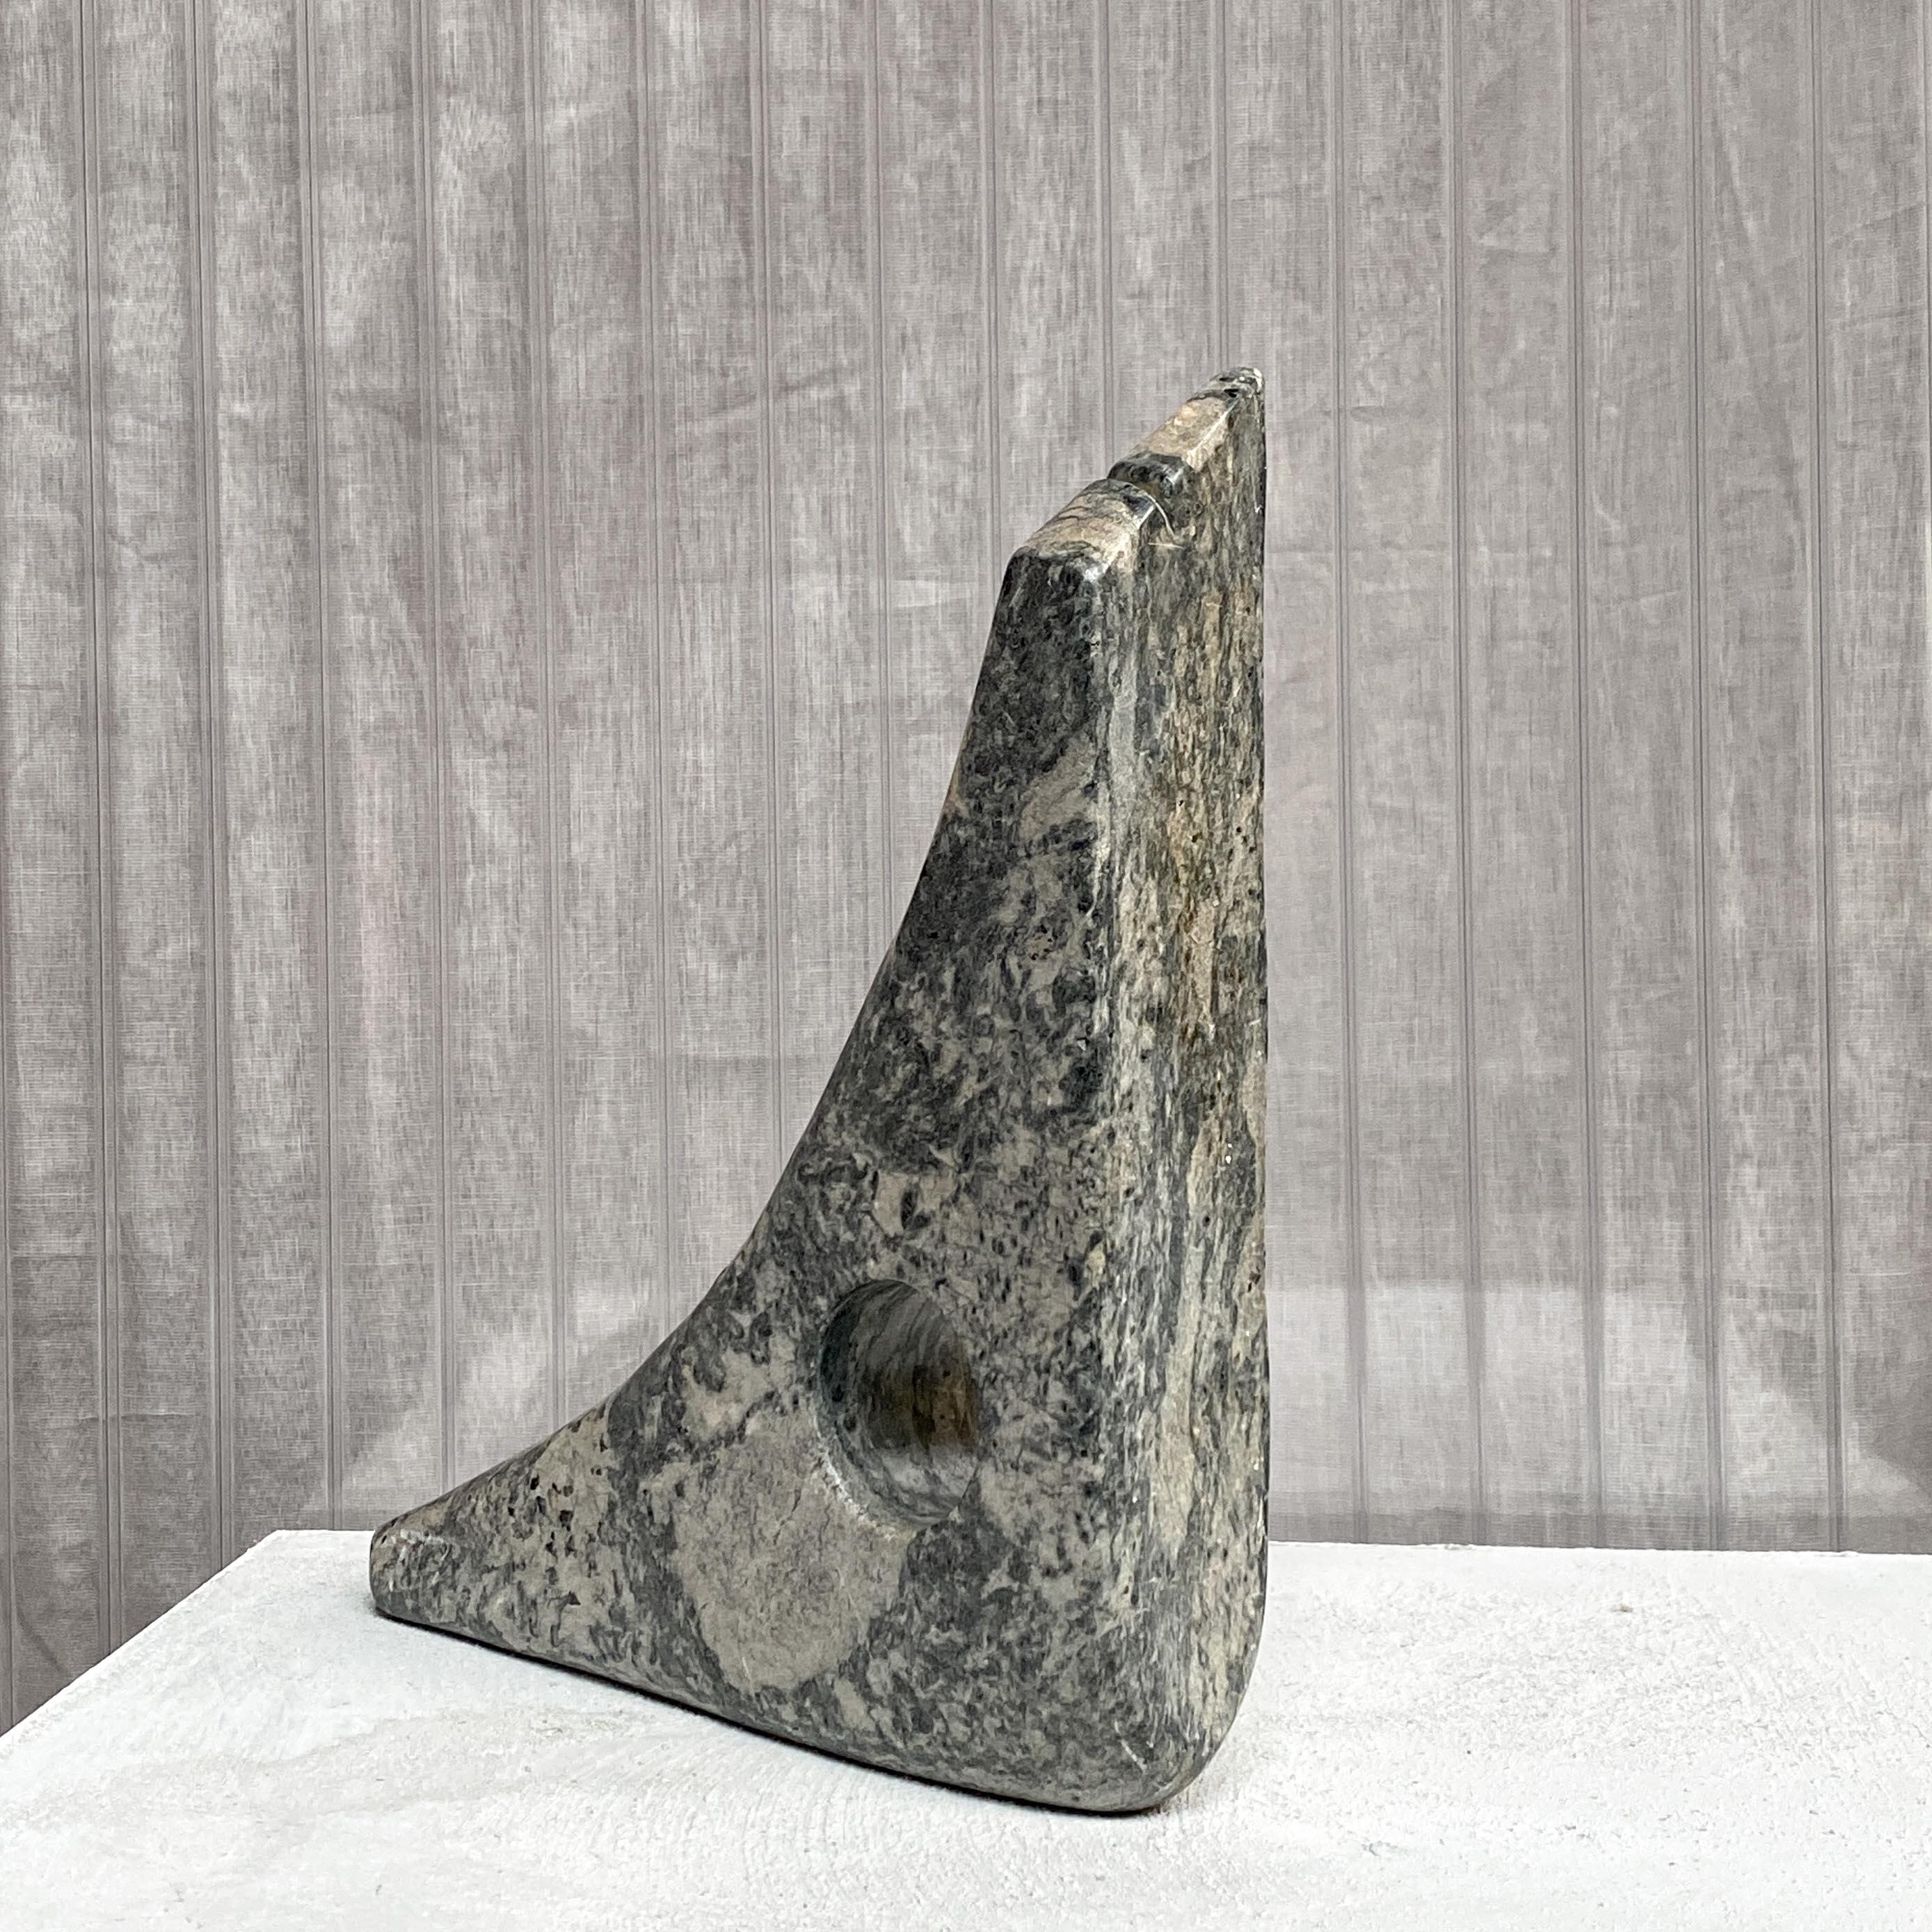 An intruding abstract sculpture in a triangular shape with a circular hole. A playful interpretation of an open & closed volume, reminiscent of the works Isamu Noguchi. Although not big in size, the sculpture as a strong spatial presence. Handcarved